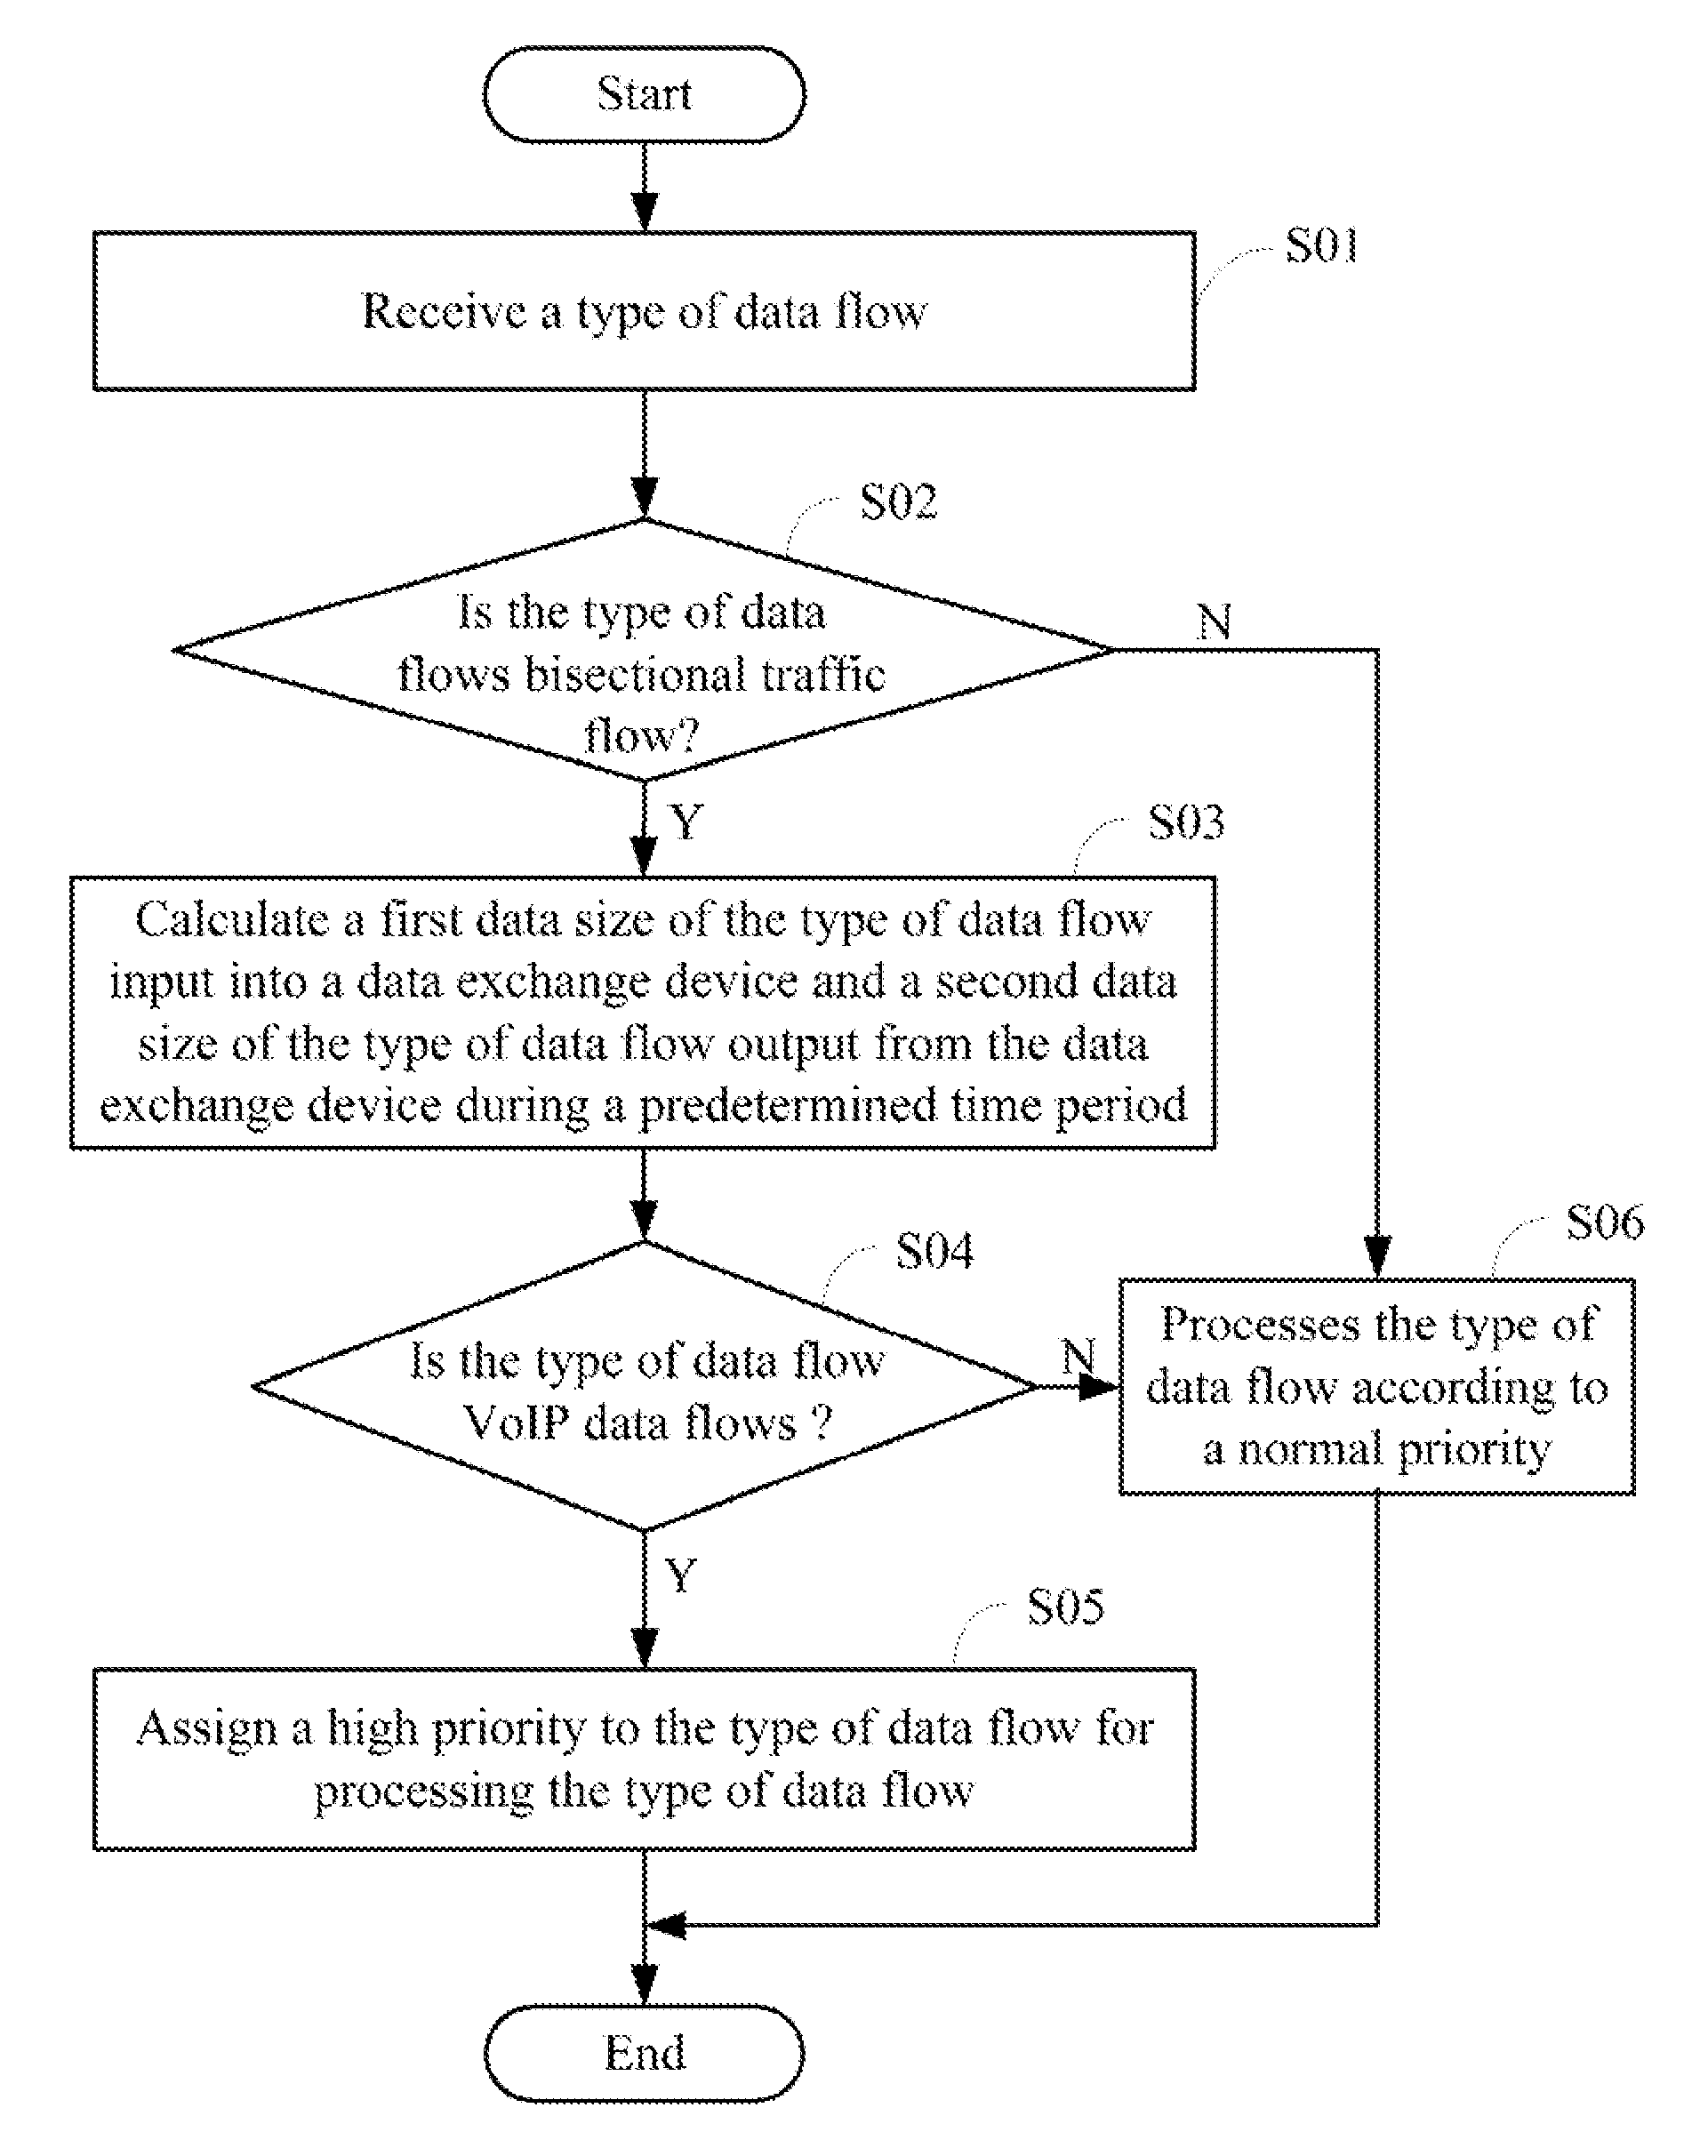 Apparatus and method for VoIP traffic flow identification